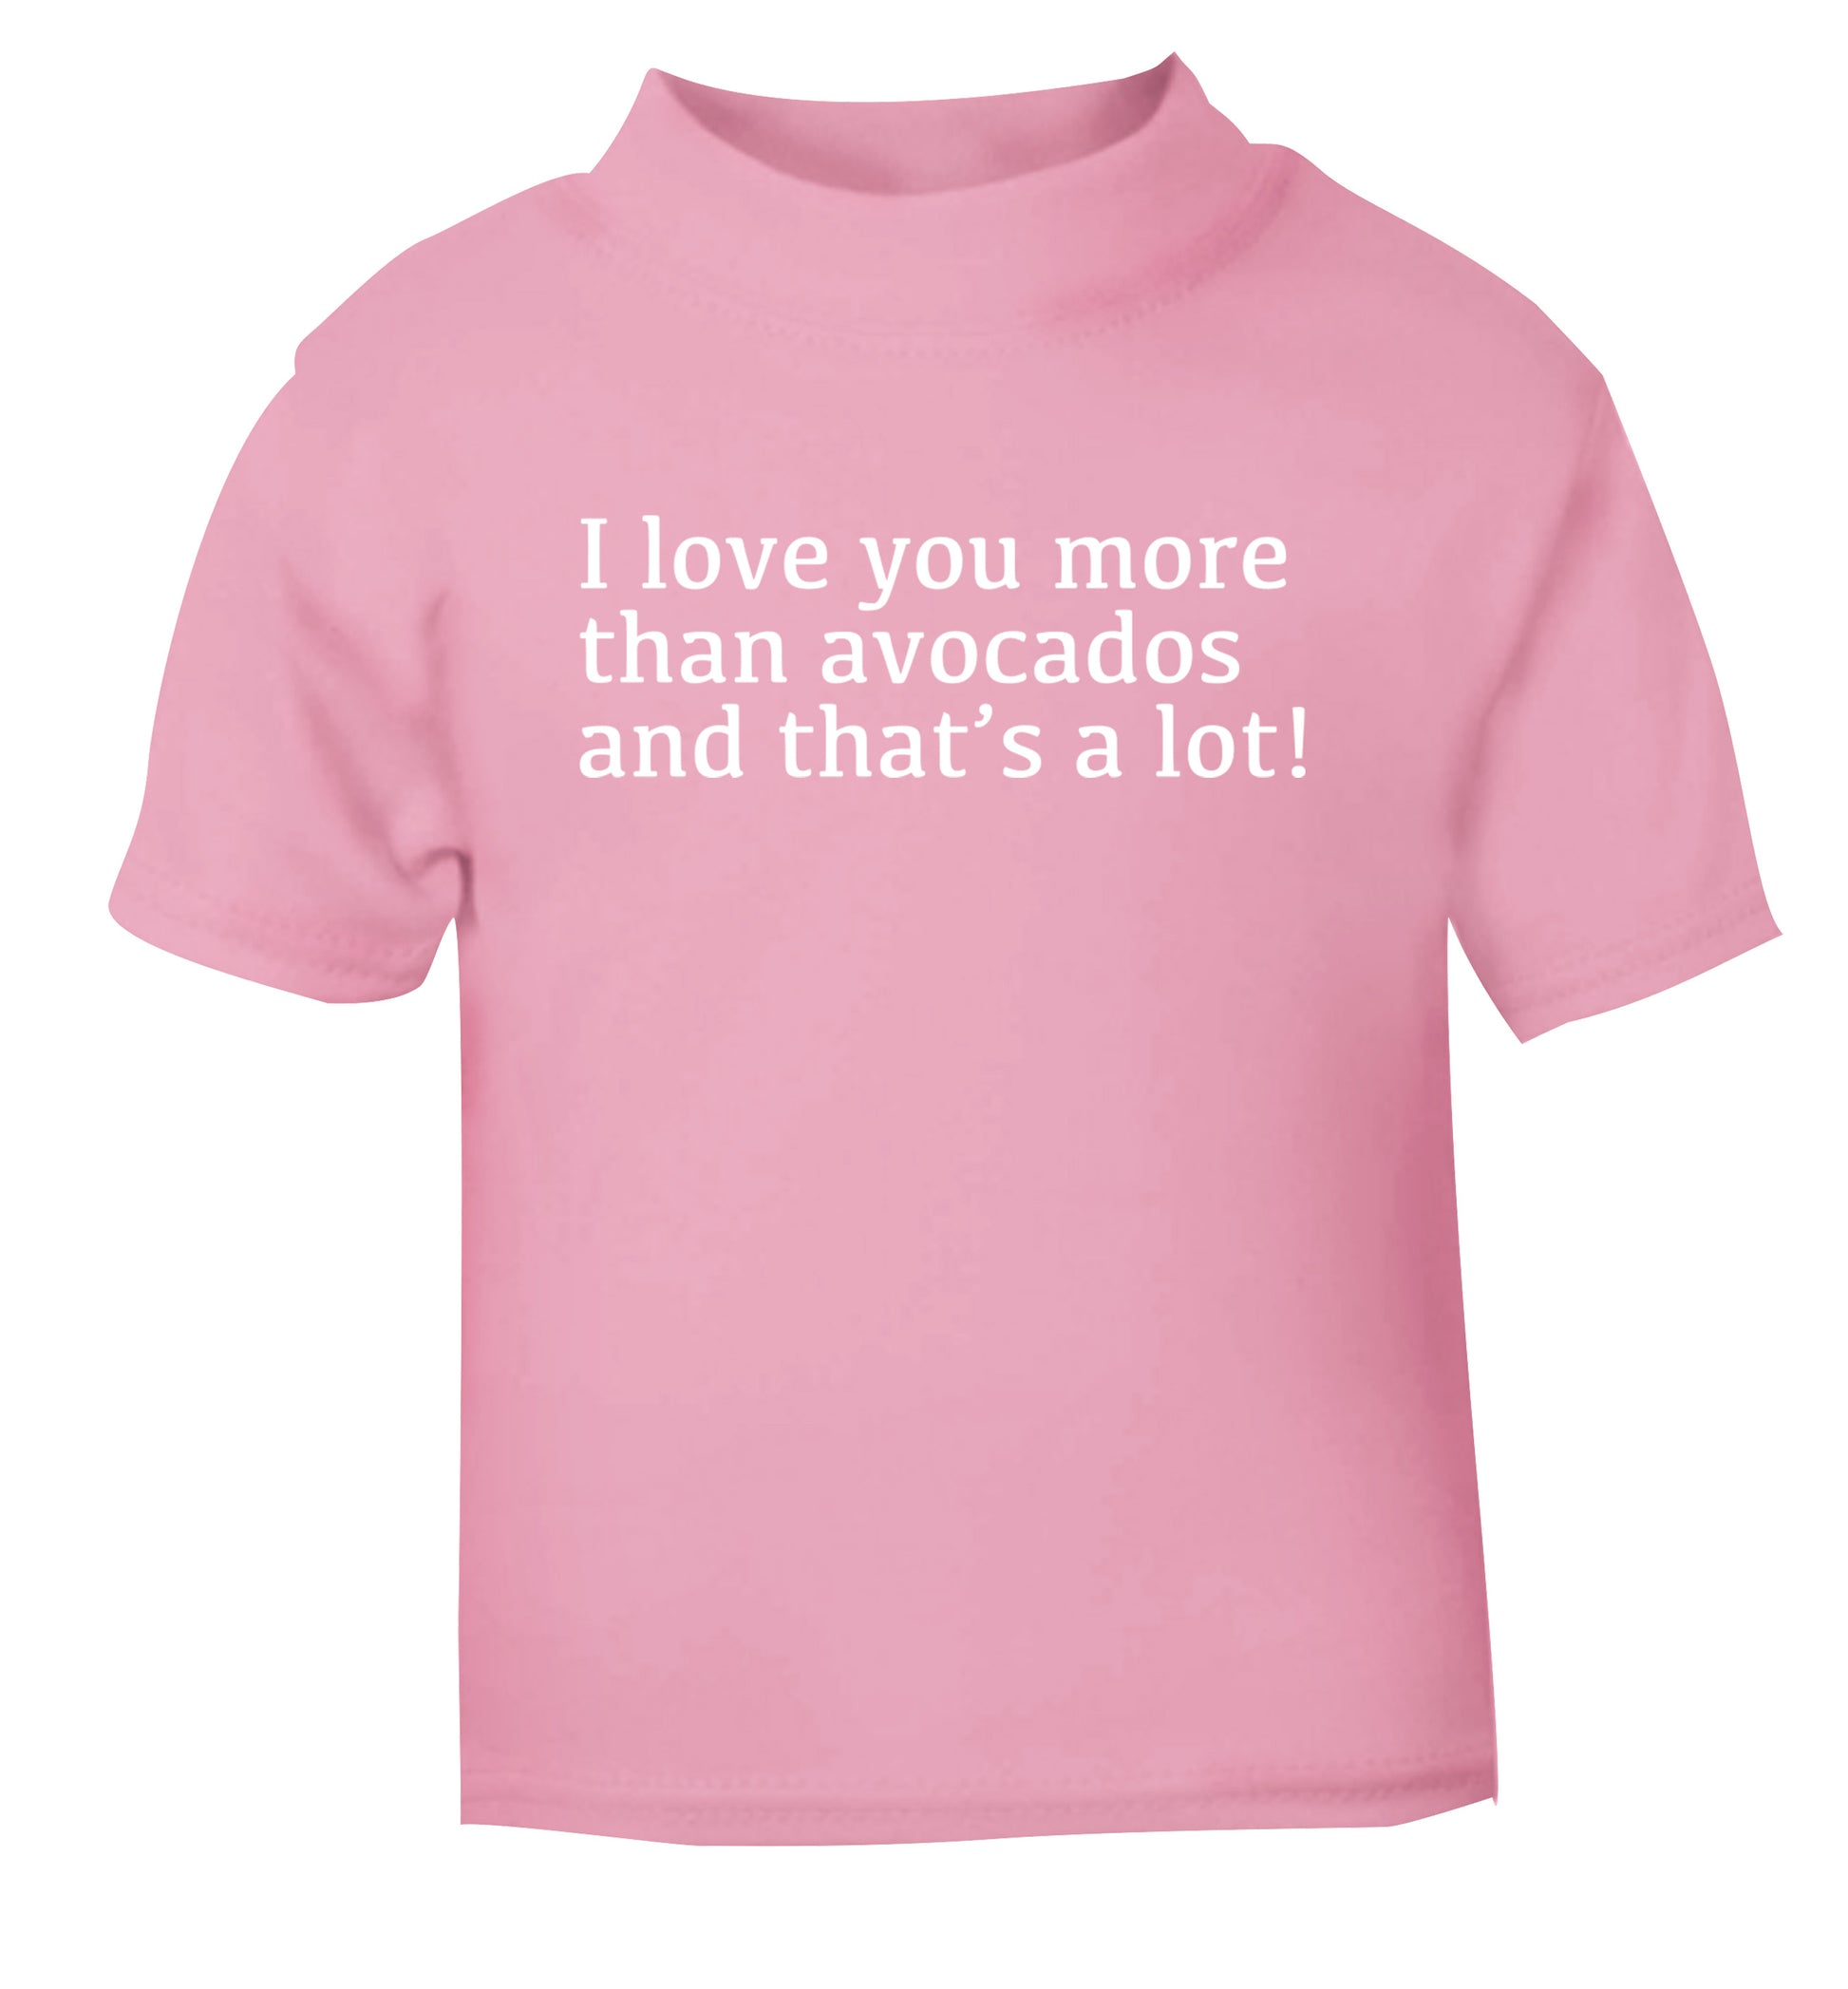 I love you more than avocados and that's a lot light pink Baby Toddler Tshirt 2 Years